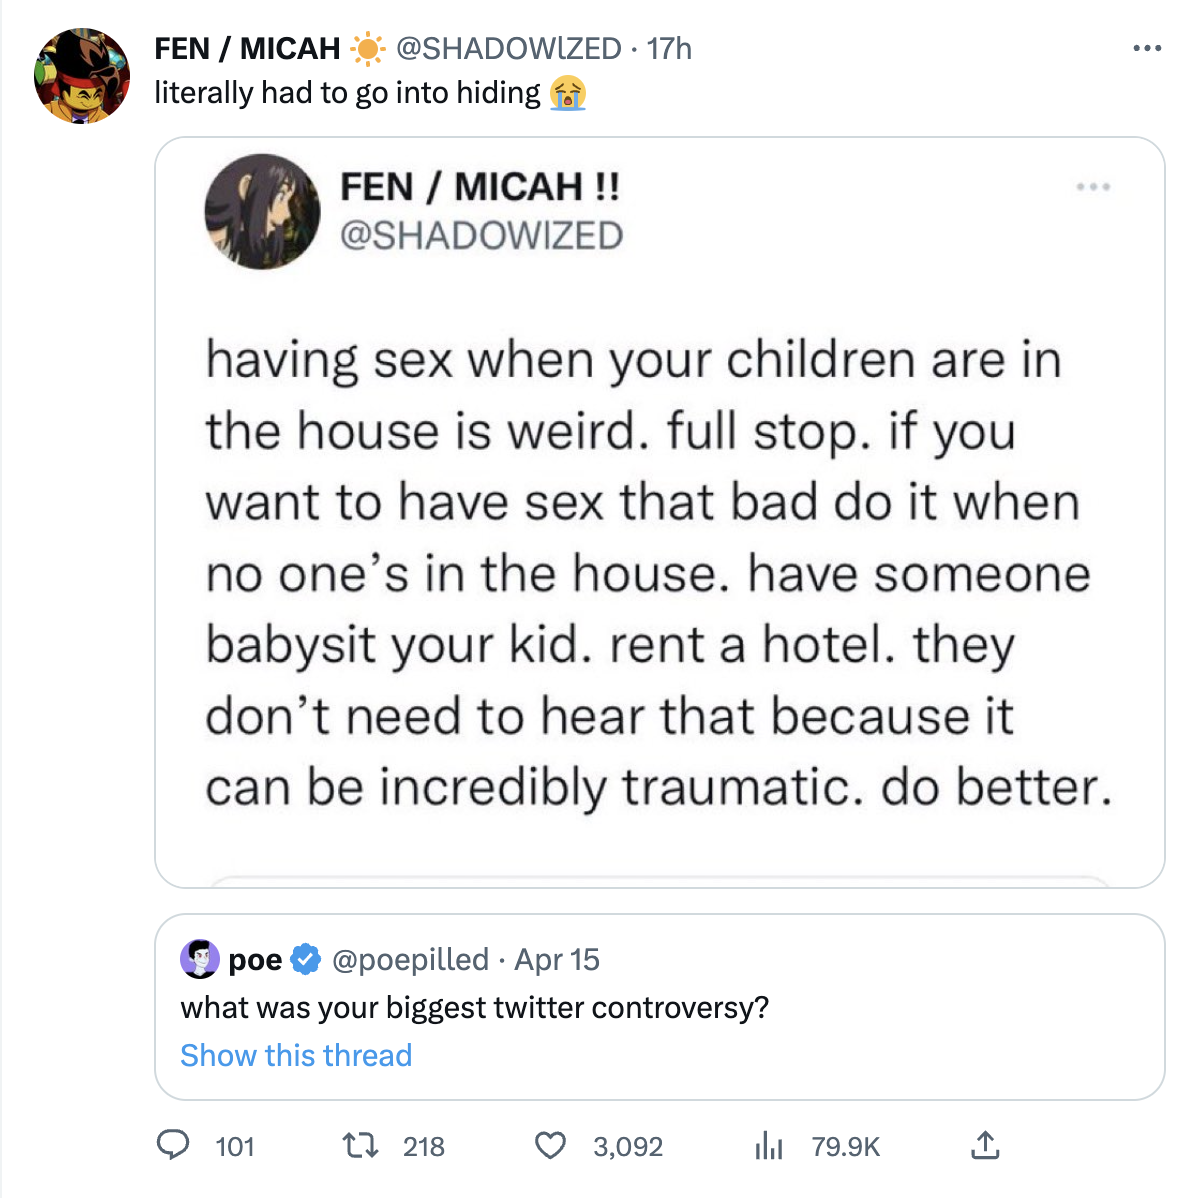 controversial tweets - document -  literally had to go into hiding !! having sex when your children are in the house is weird. full stop. if you want to have sex that bad do it when no one's in the house. have someone babysit your kid. rent a hotel. they